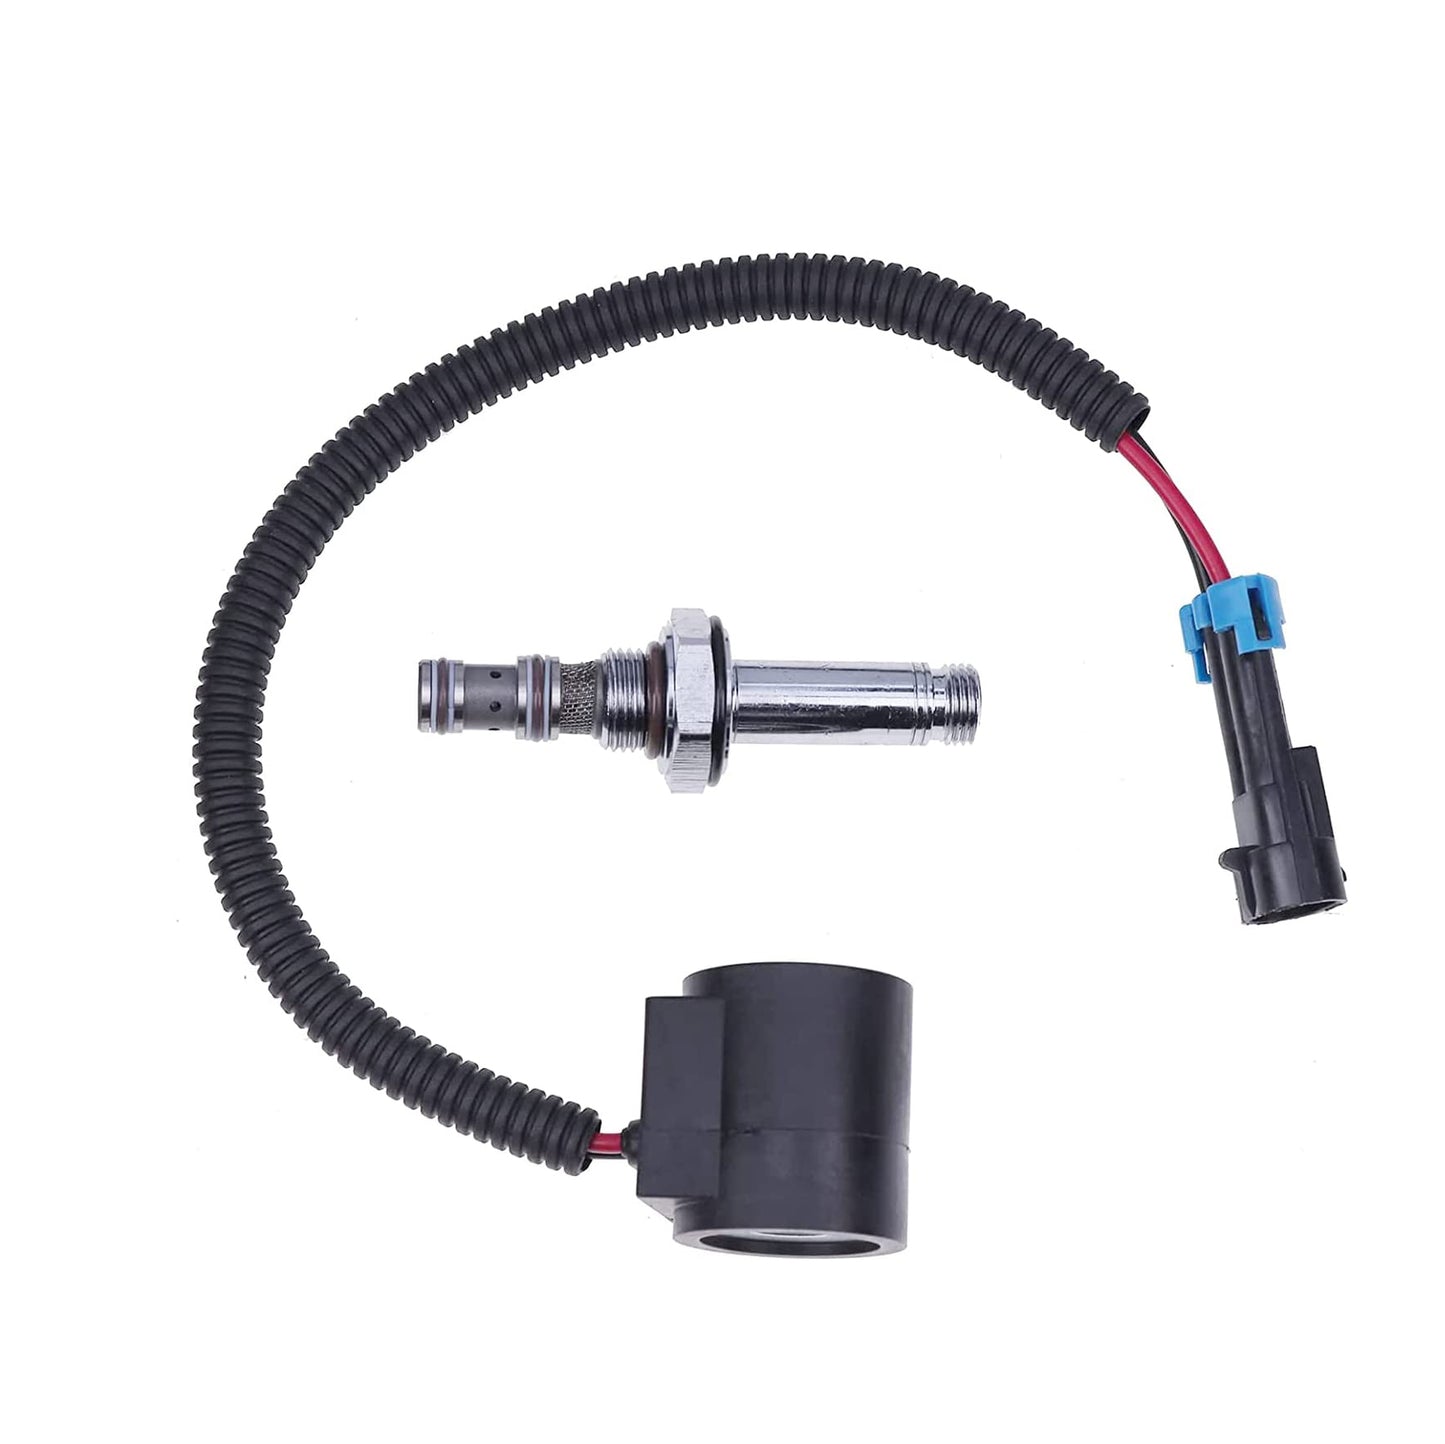 New Solenoid Valve Element Kit 6672471 6671025 Compatible with Bobcat Loaders 864 873 883 963 A200 A300 A770 S70